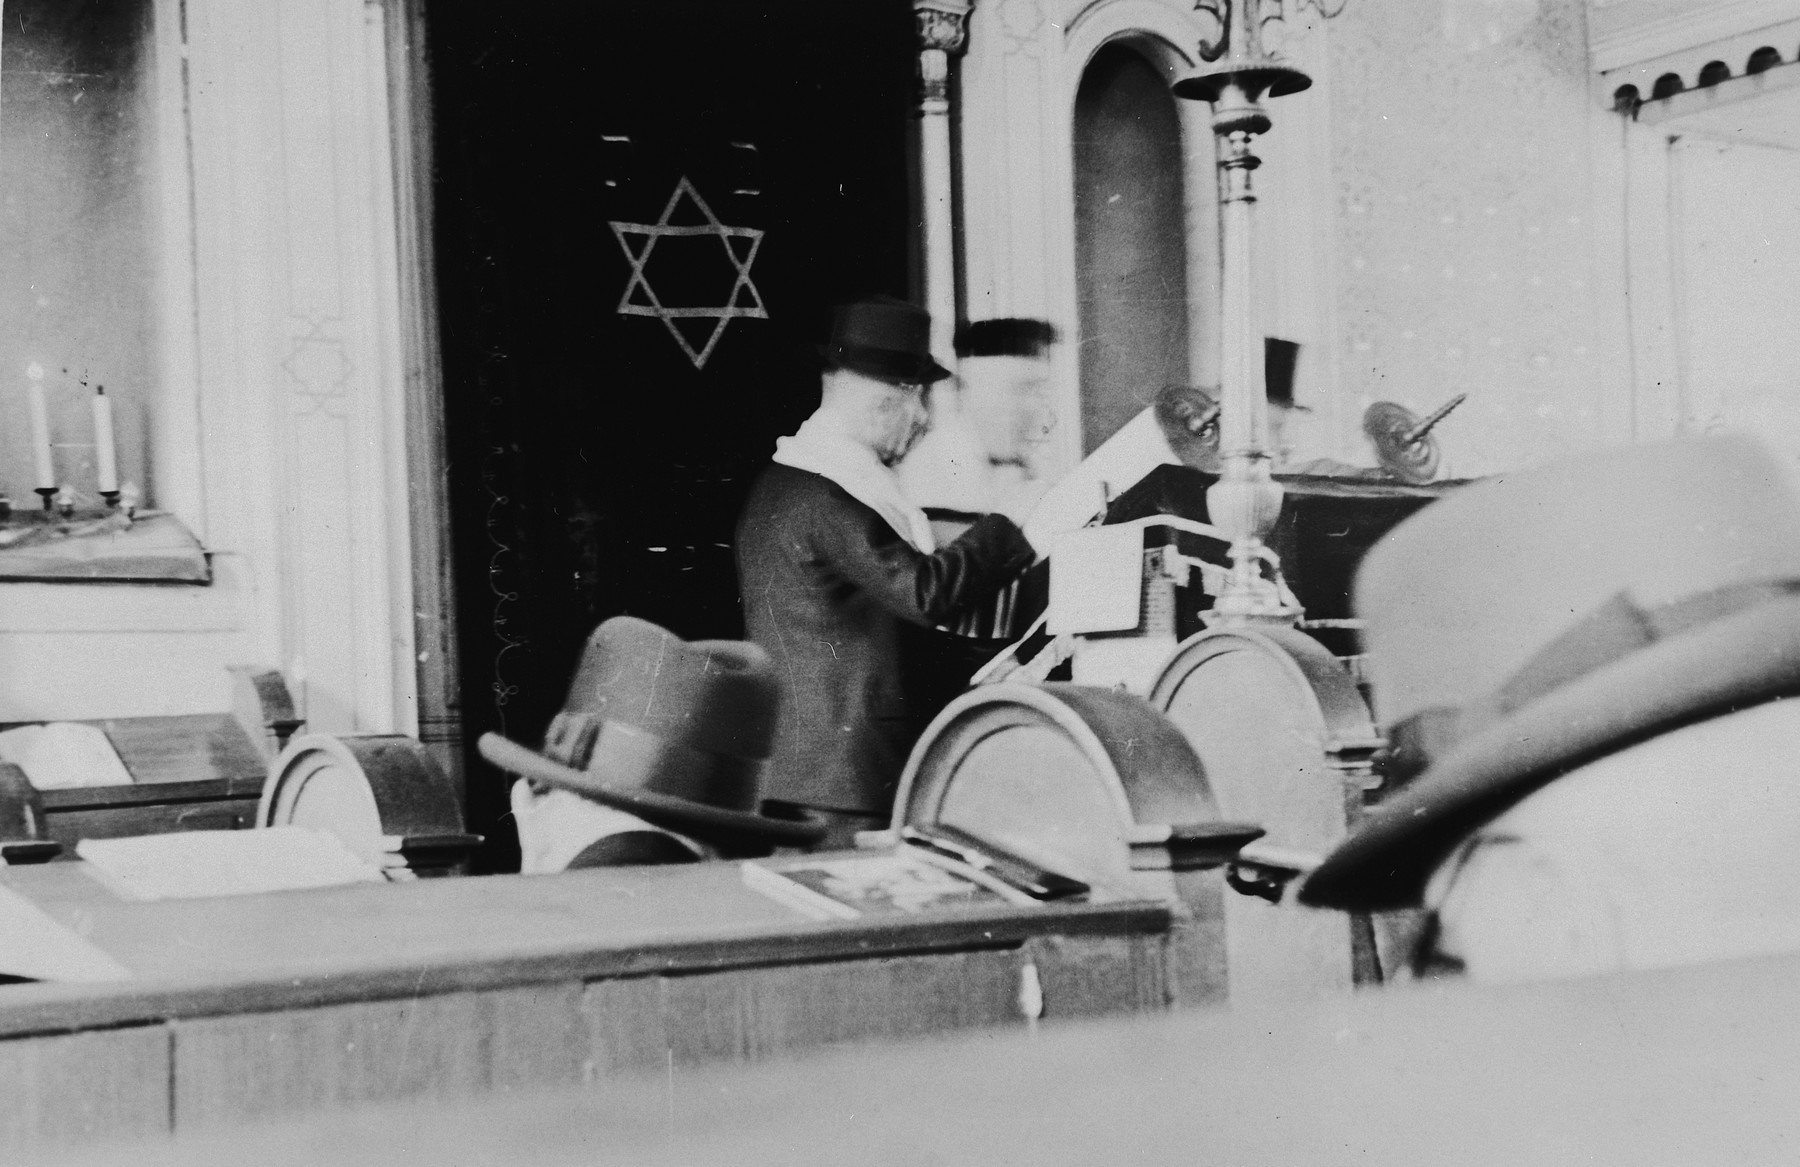 German Jews gather for Sabbath morning prayers in the synagogue in Breisach.

Cantor Michael Eisemann is leading the service.  (Though it is normally forbidden to photograph Sabbath services, an exception was made for the purpose of documenting the community.)

This is part of series of photographs taken of the Breisach Jewish community 1937.  In October 1940 the entire community was deported to the Gurs internment camp in southern France.